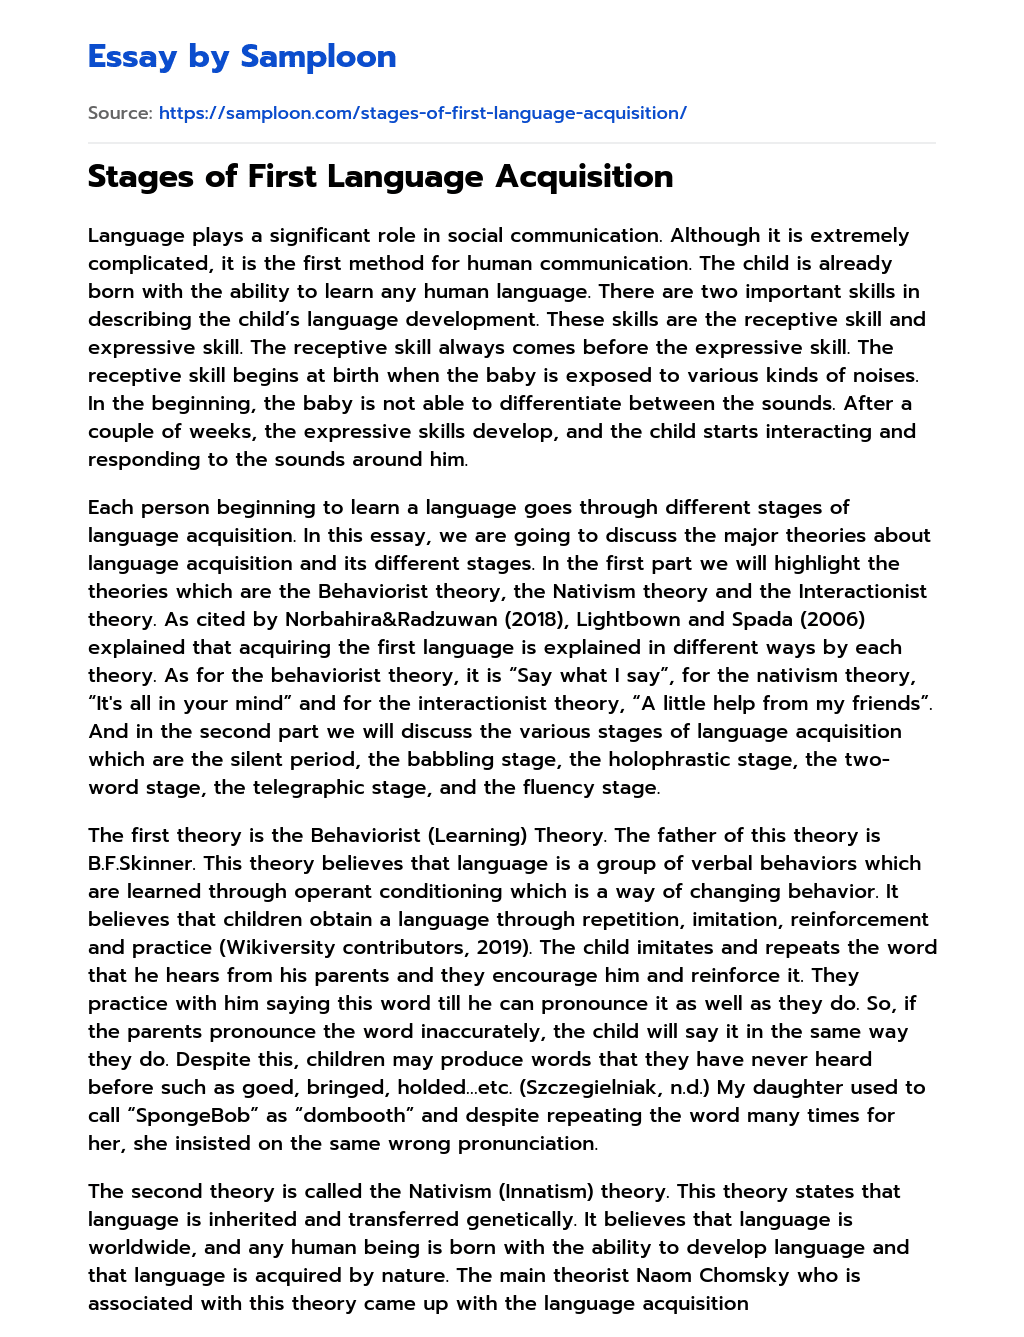 Stages of First Language Acquisition essay